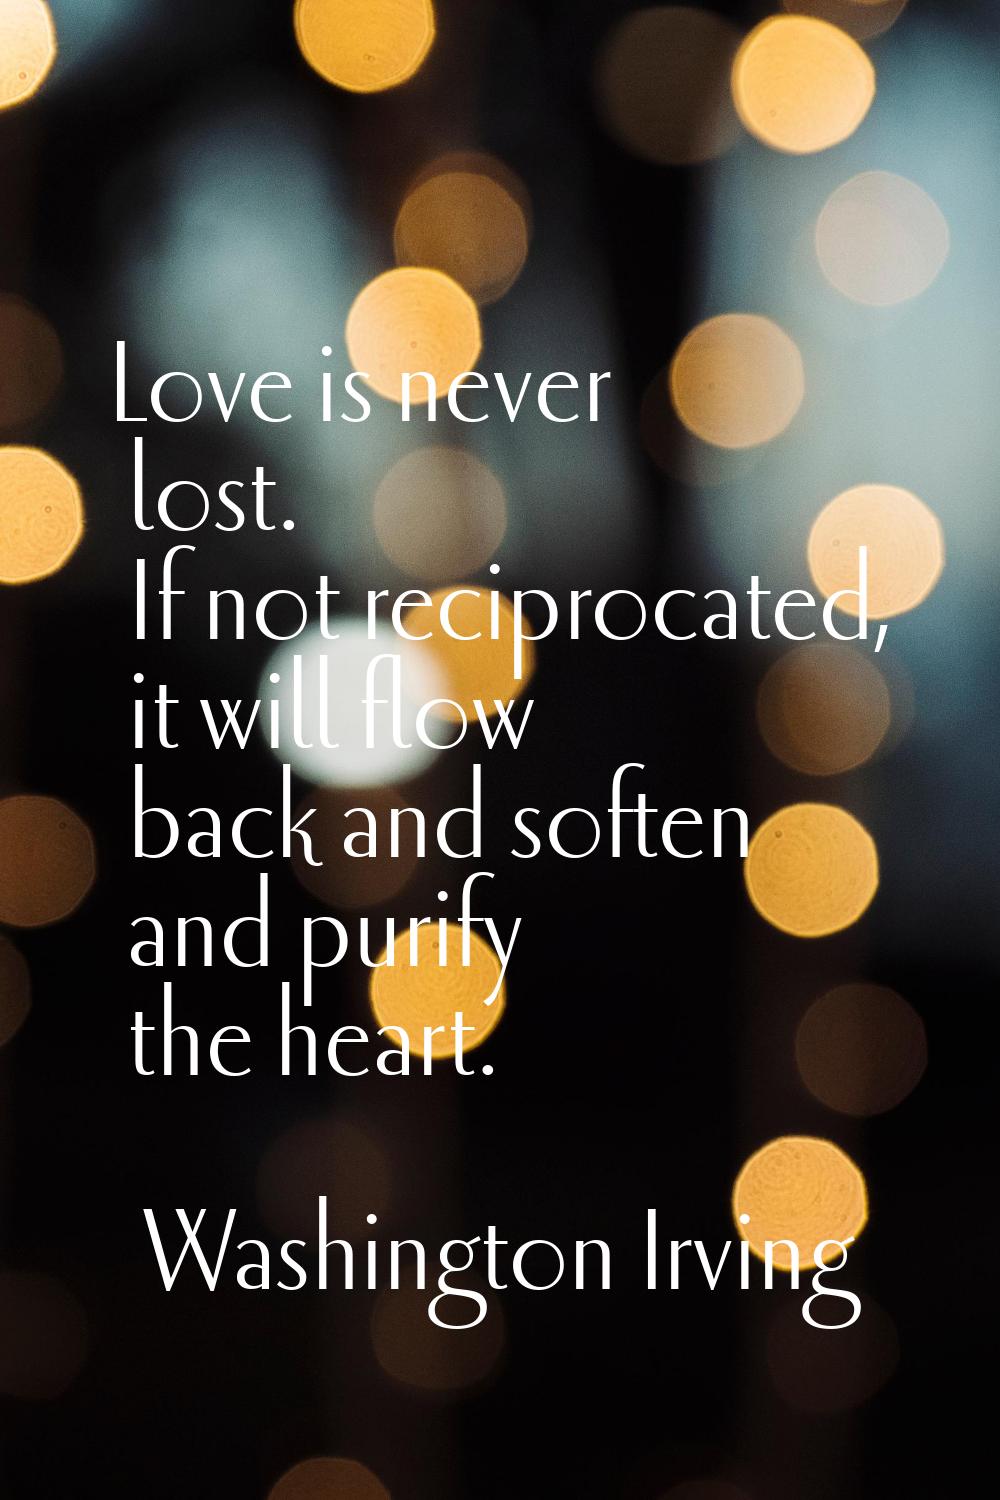 Love is never lost. If not reciprocated, it will flow back and soften and purify the heart.